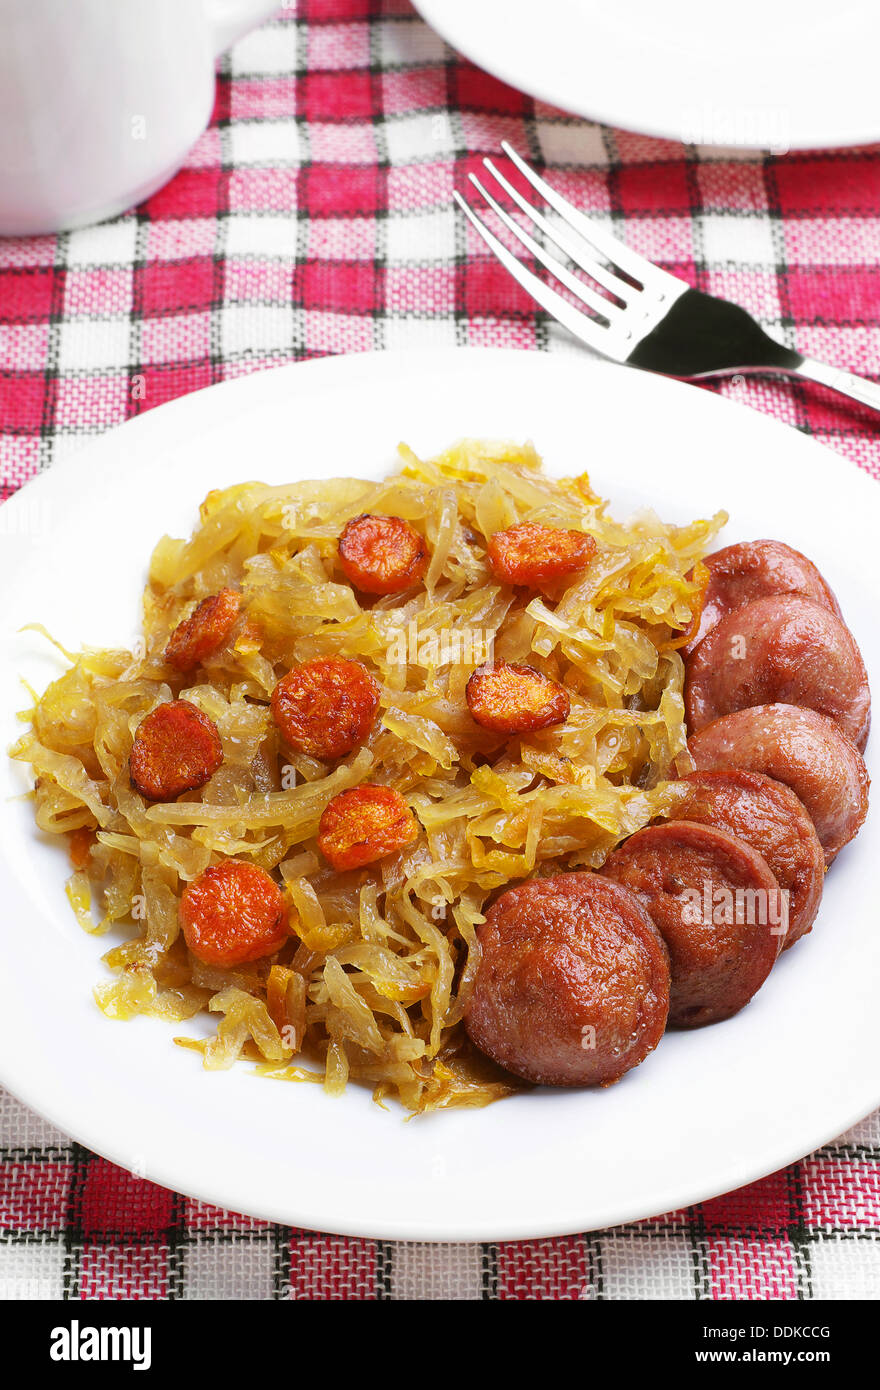 Braised cabbage with grilled sausage on a table Stock Photo